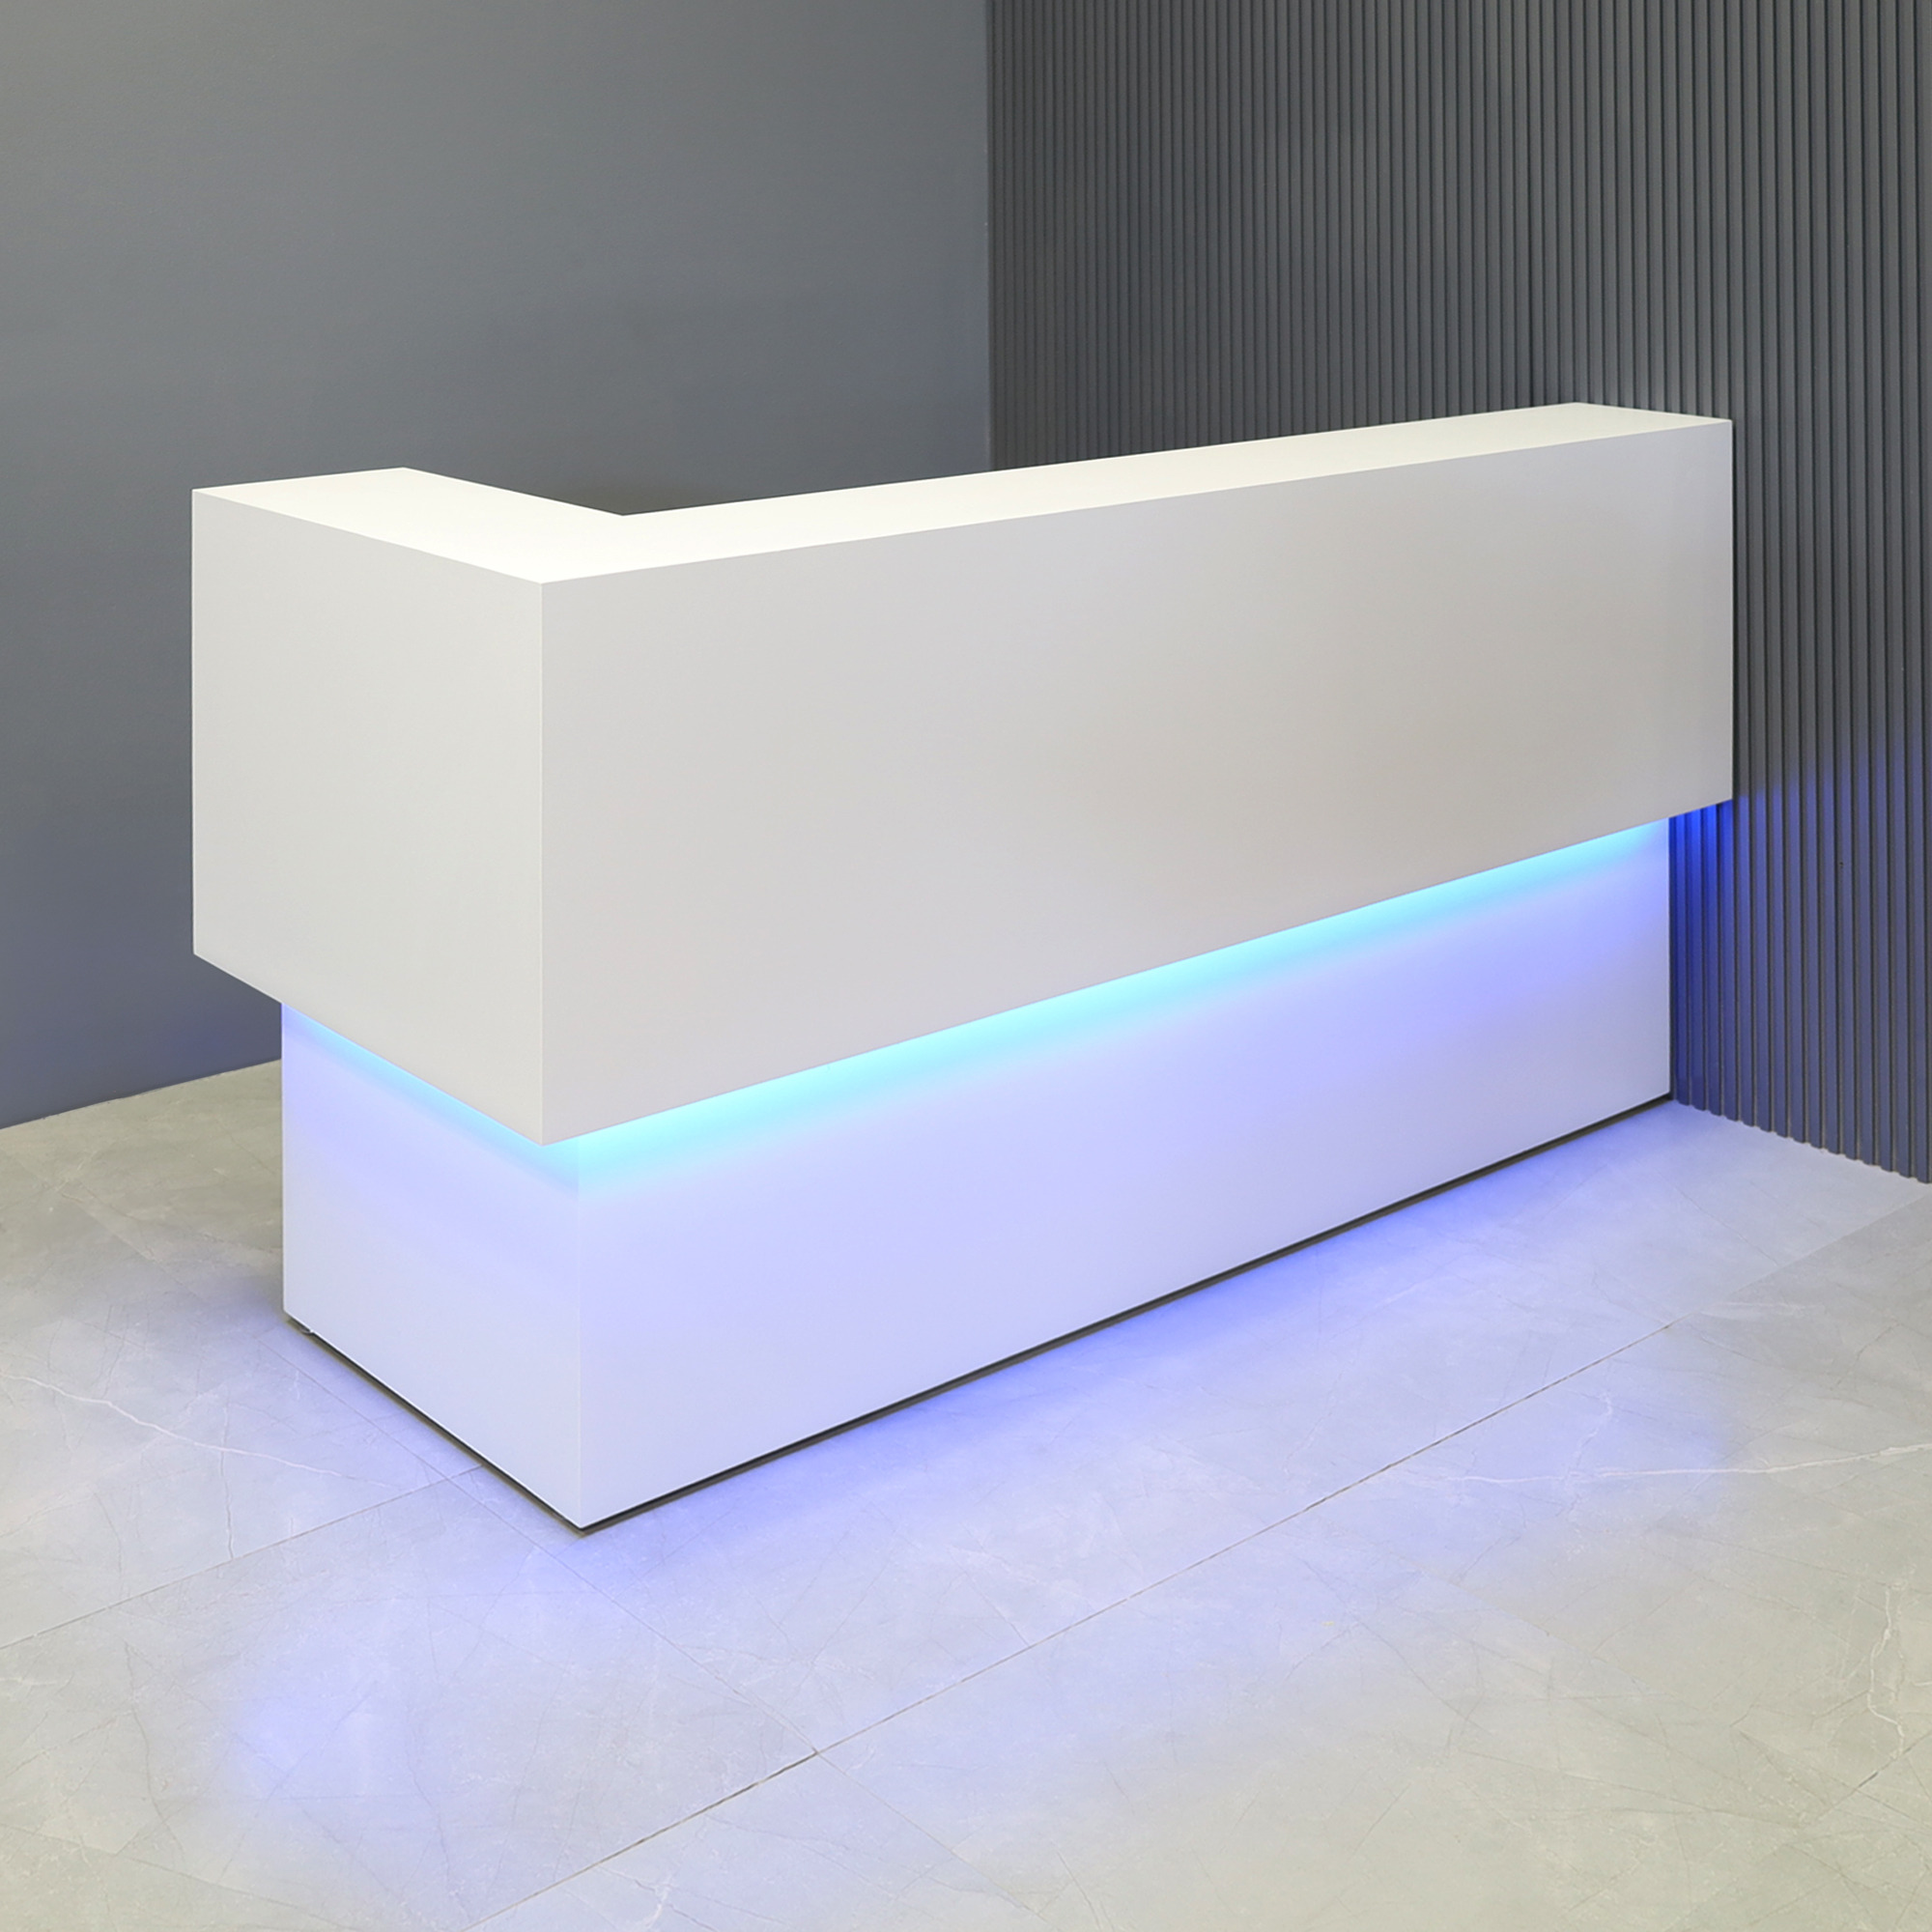 72-inch San Francisco L-Shape Reception Desk, left side l-panel when facing front in white matte laminate counter and desk, with color LED, shown here.